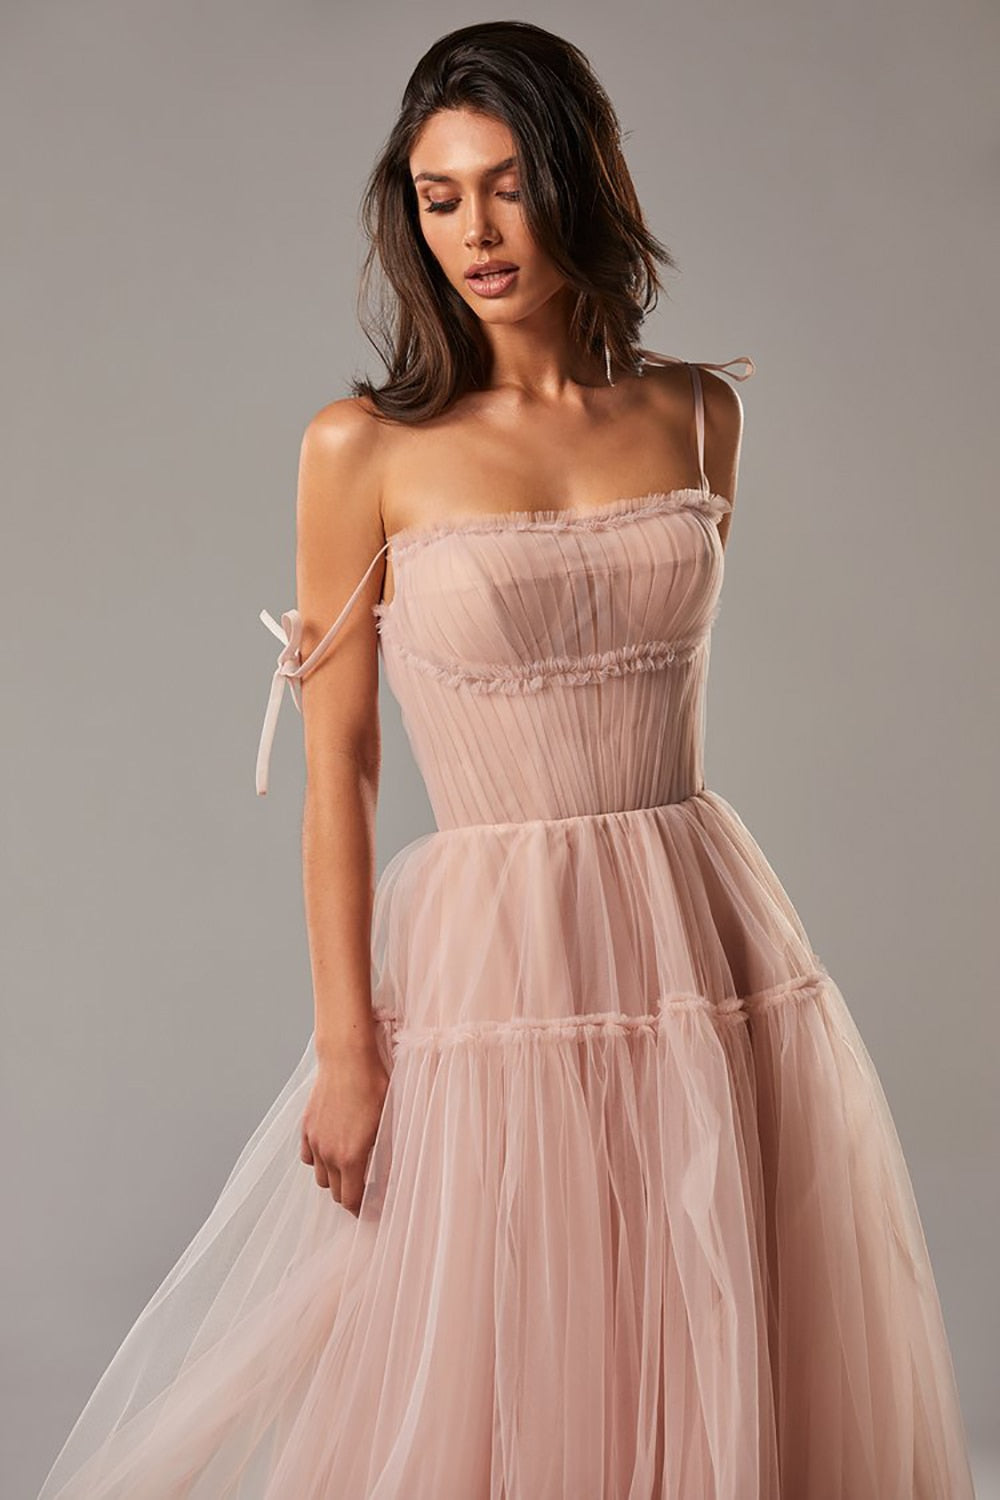 Blush Pink/Blue Long Prom Dresses Spaghetti Straps Tiered Skirt A-Line Party Dresses Ple